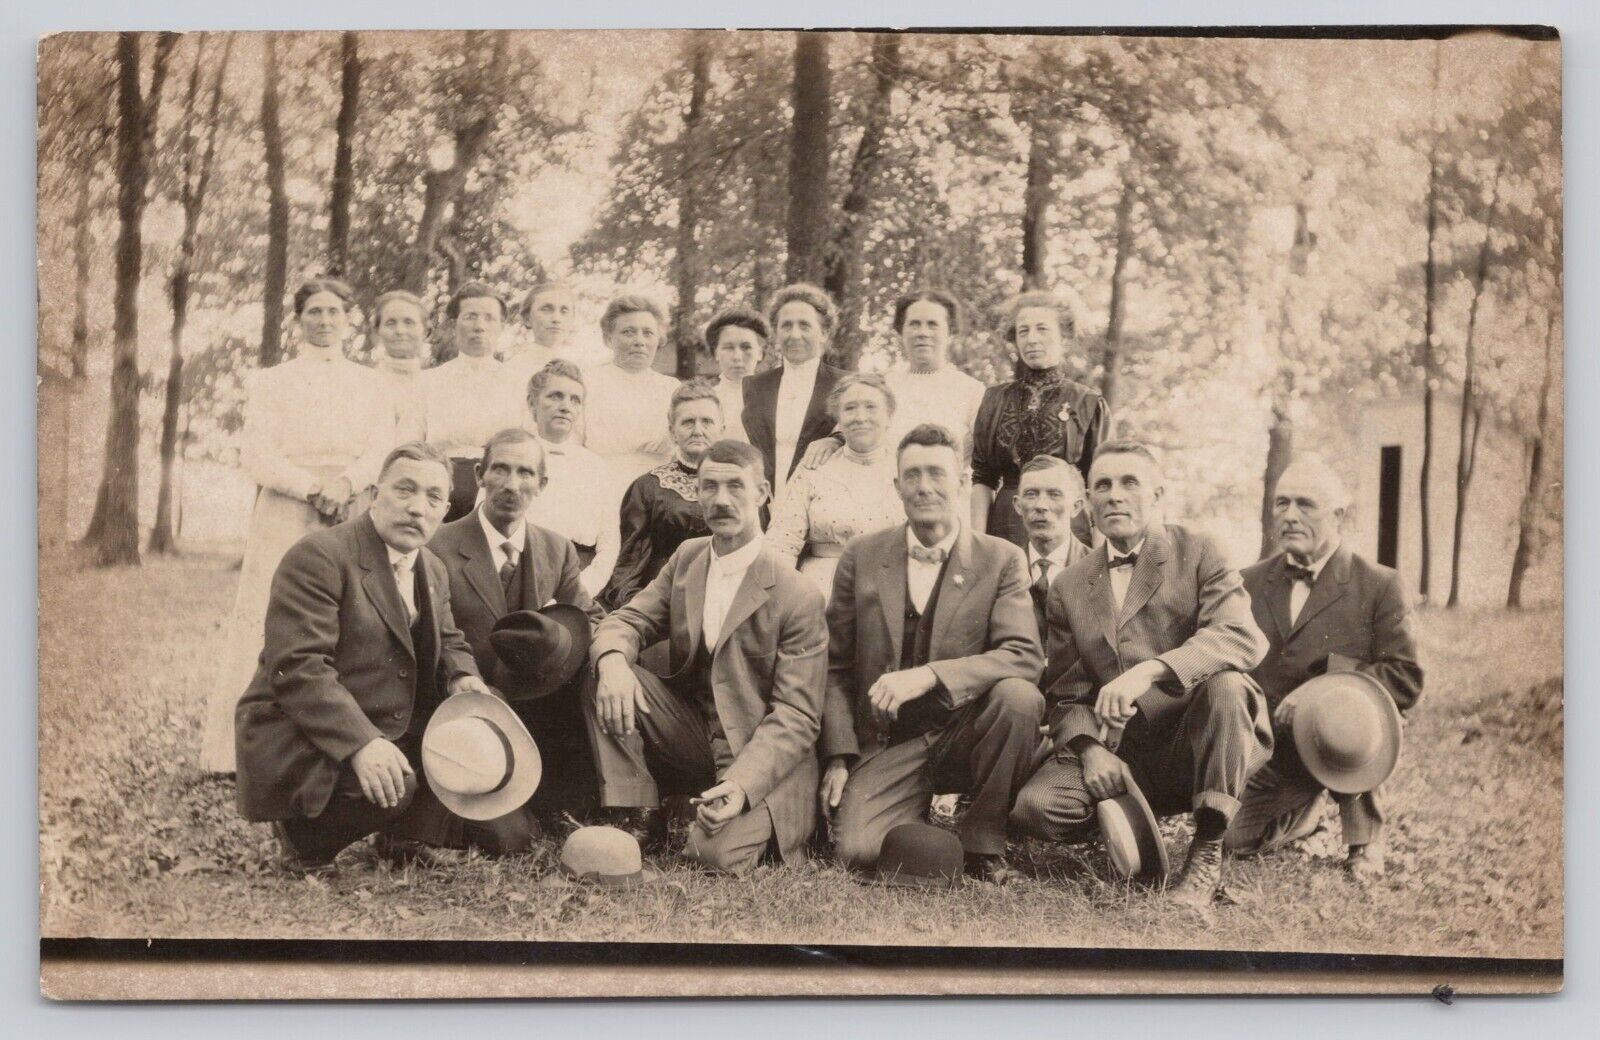 Group of Men in Suits Holding Hats and Women in Dresses c1904-1918 RPPC Postcard